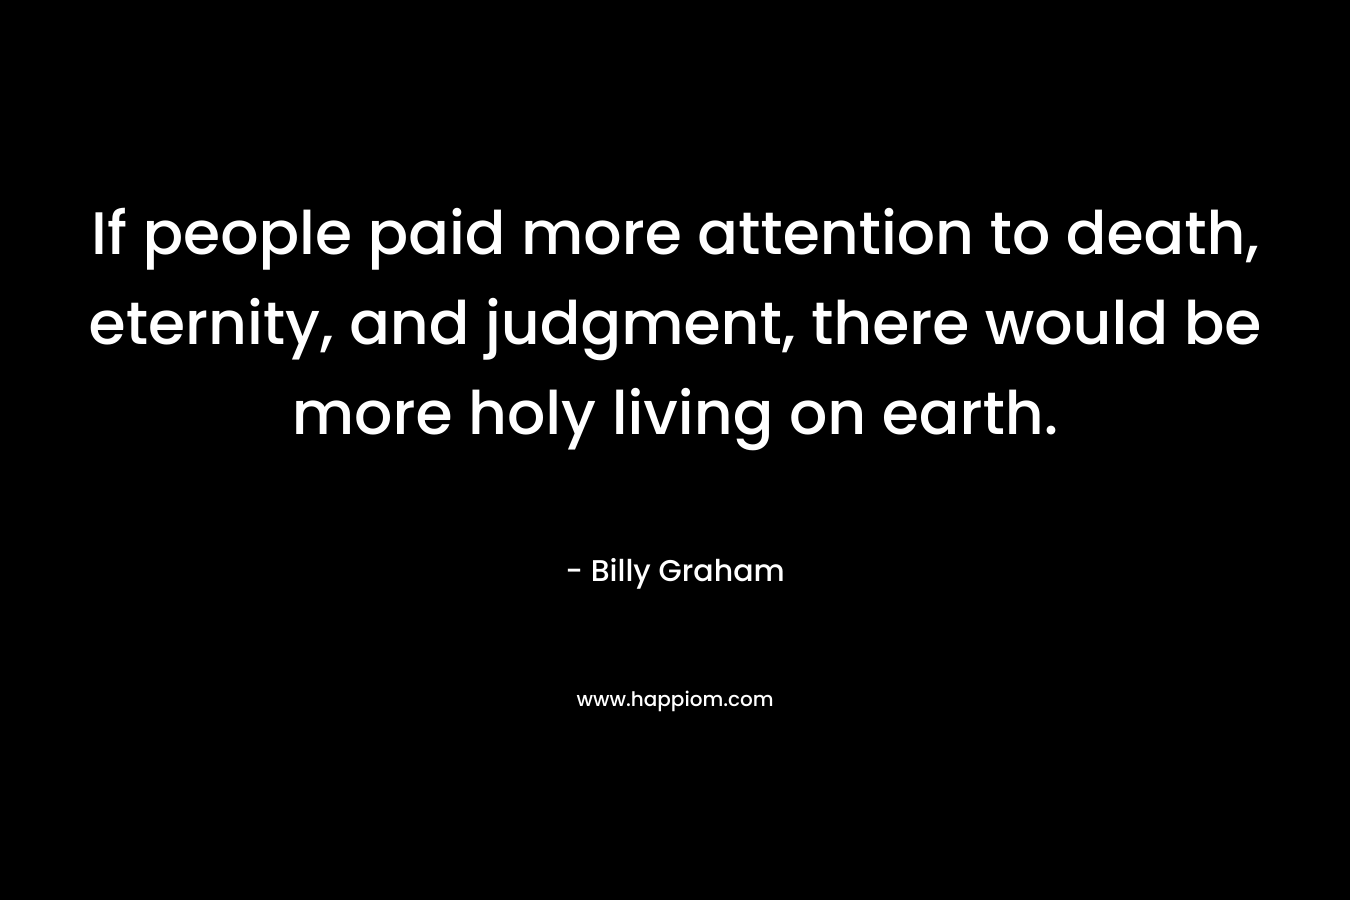 If people paid more attention to death, eternity, and judgment, there would be more holy living on earth.